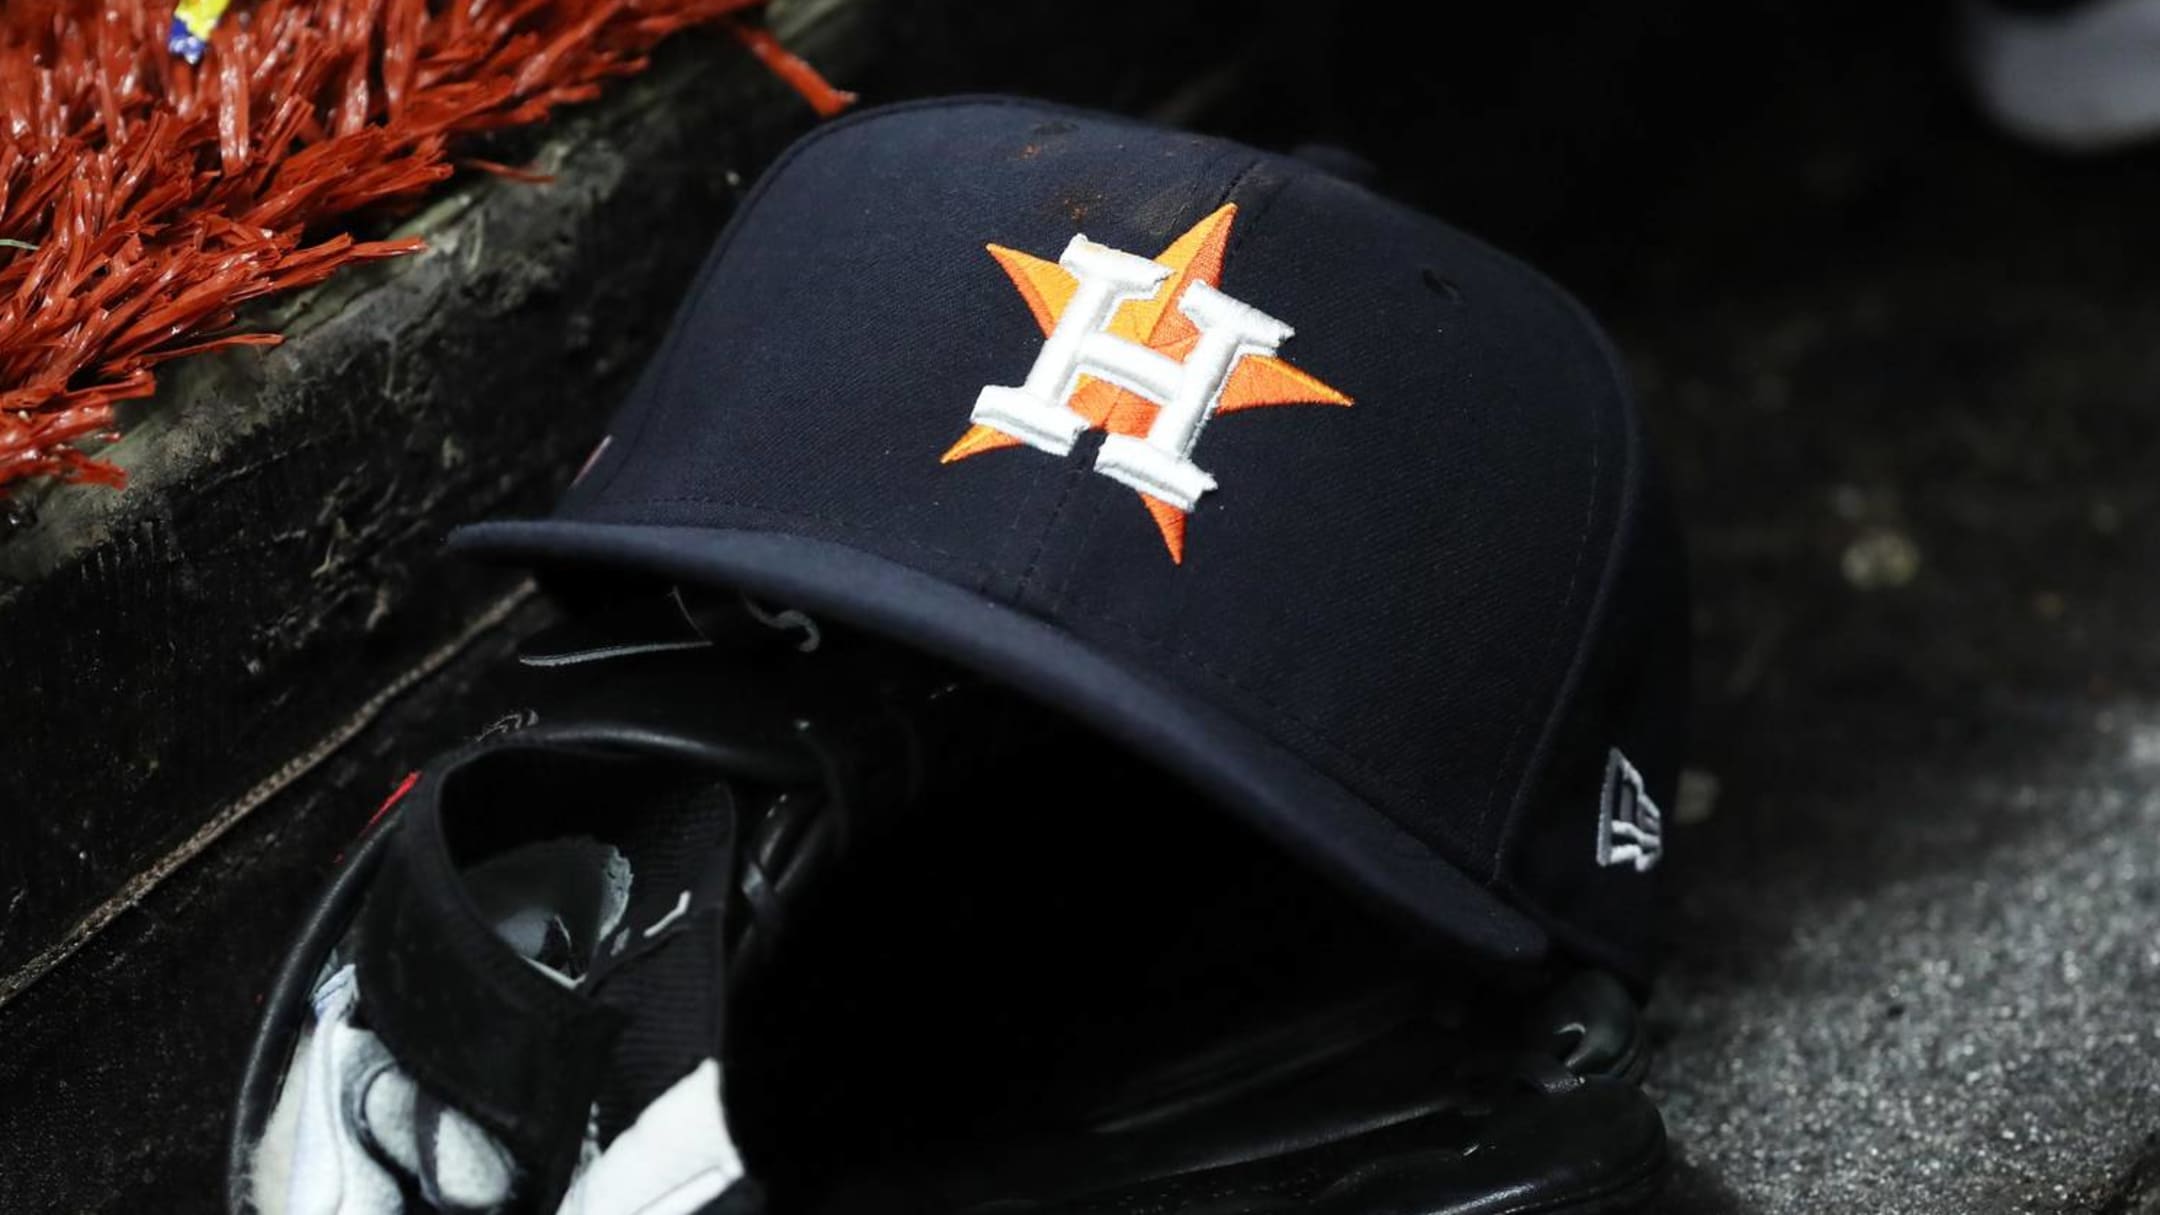 Astros cheating scandal: How to troll Houston during the 2020